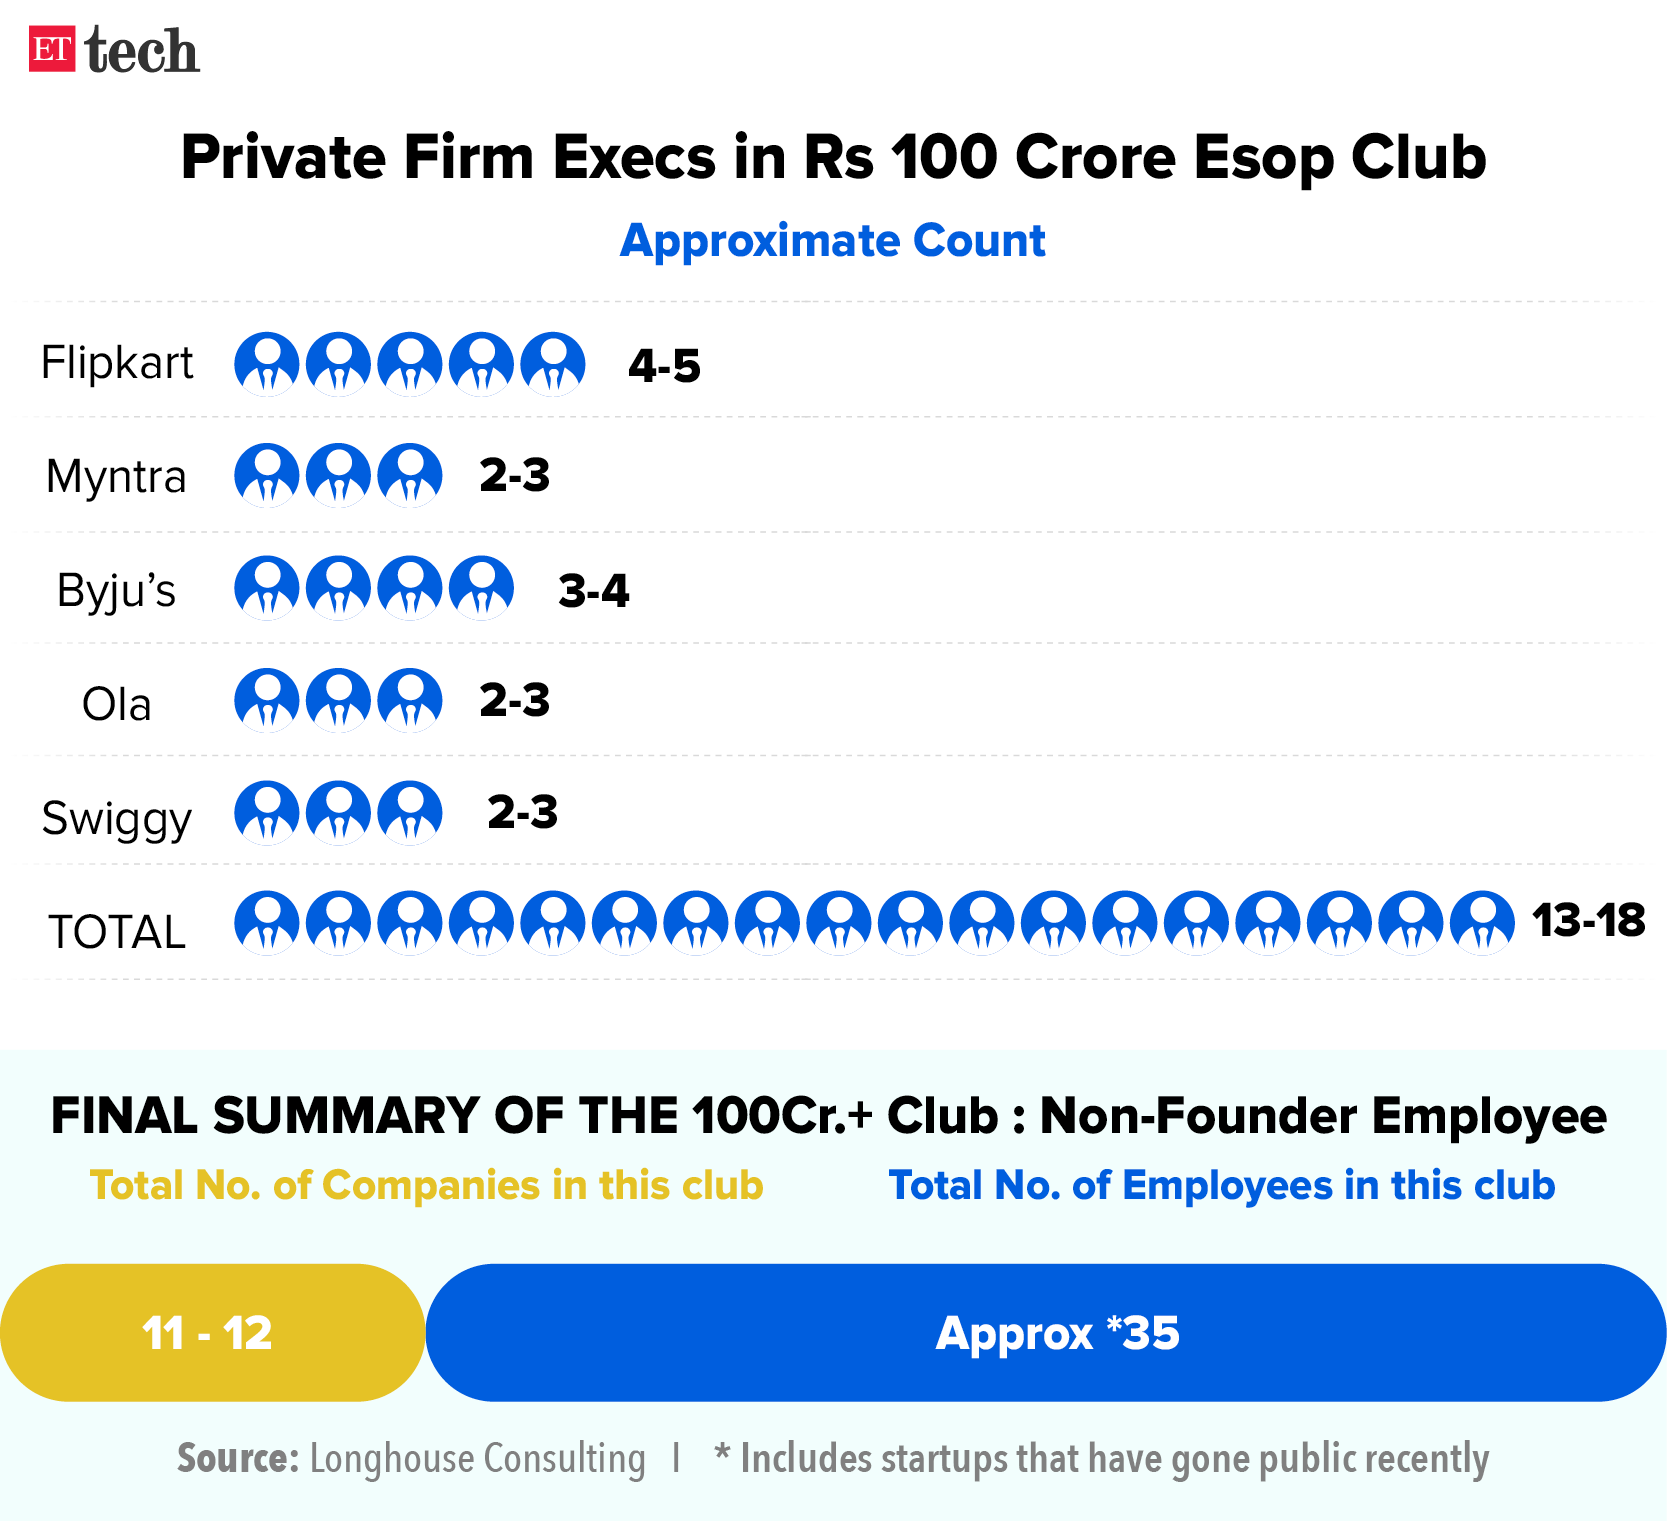 Private Firm Execs in Rs 100 Crore Esop Club